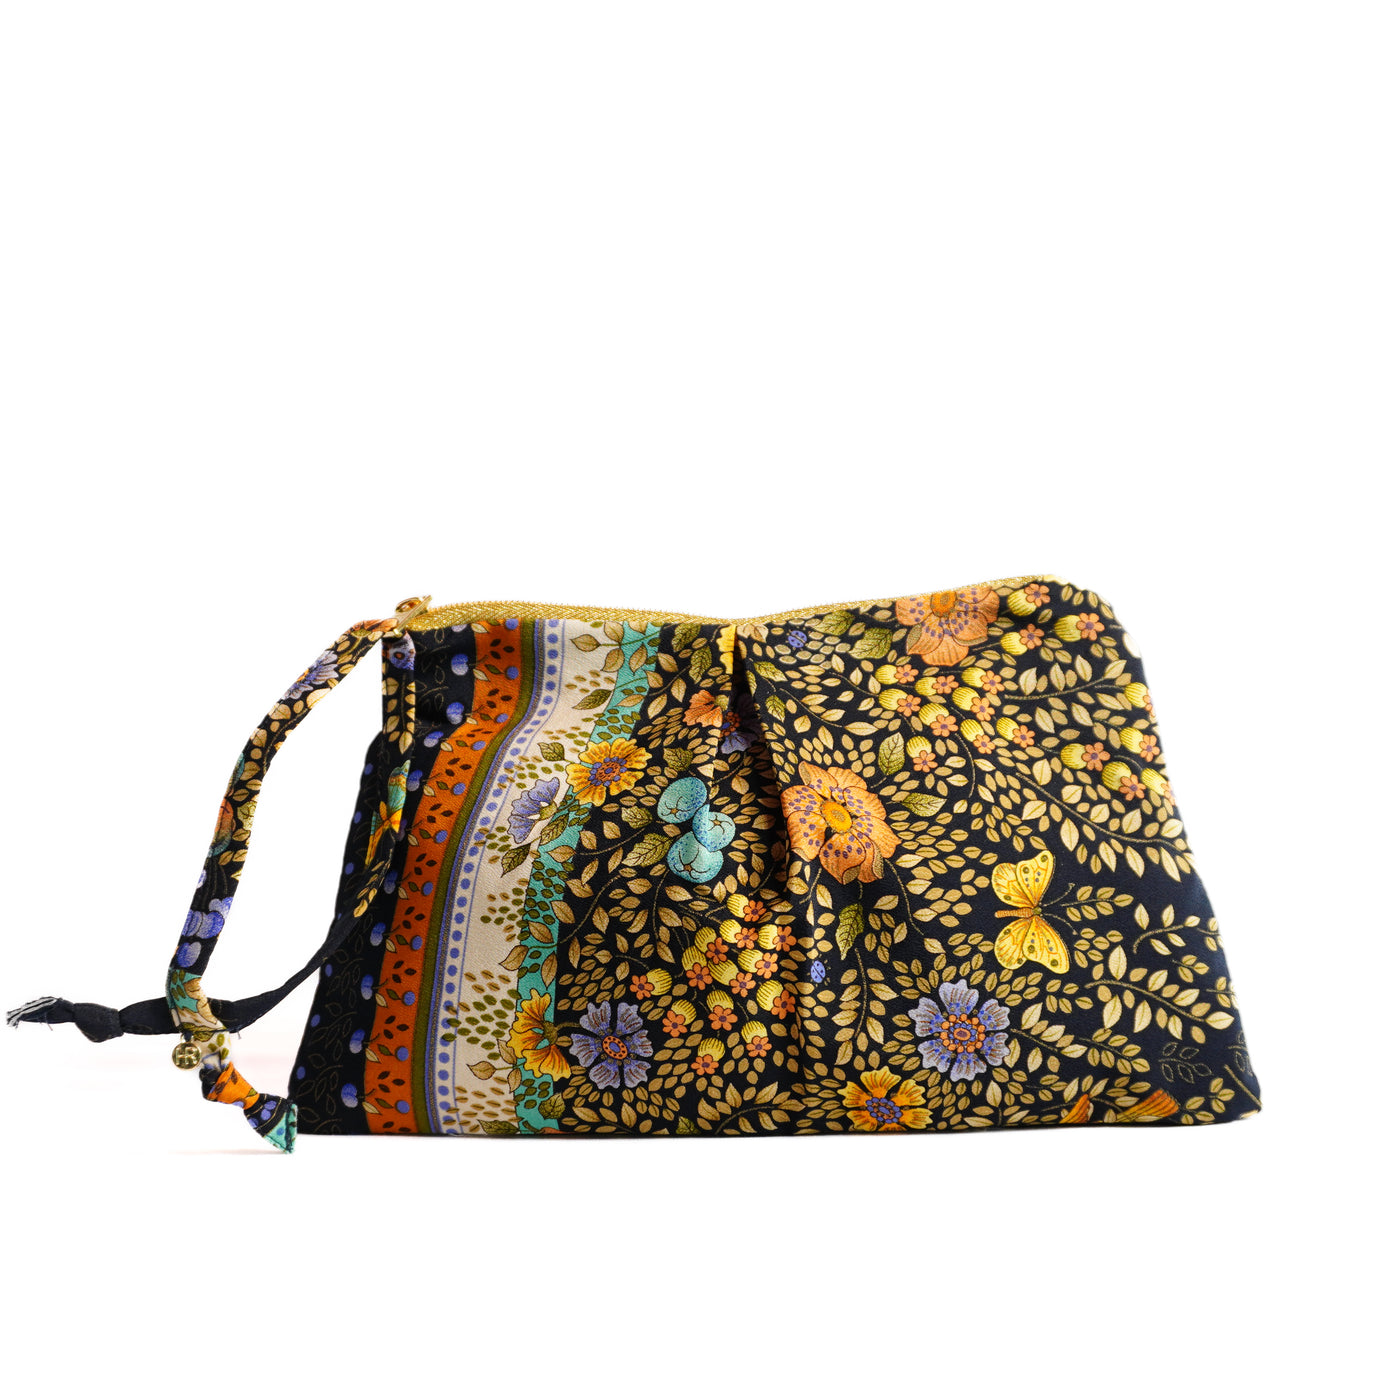 "Golden Garden" Scarf Bag (Upcycled from Gucci Scarf) Party Clutch Hampton Road Designs   